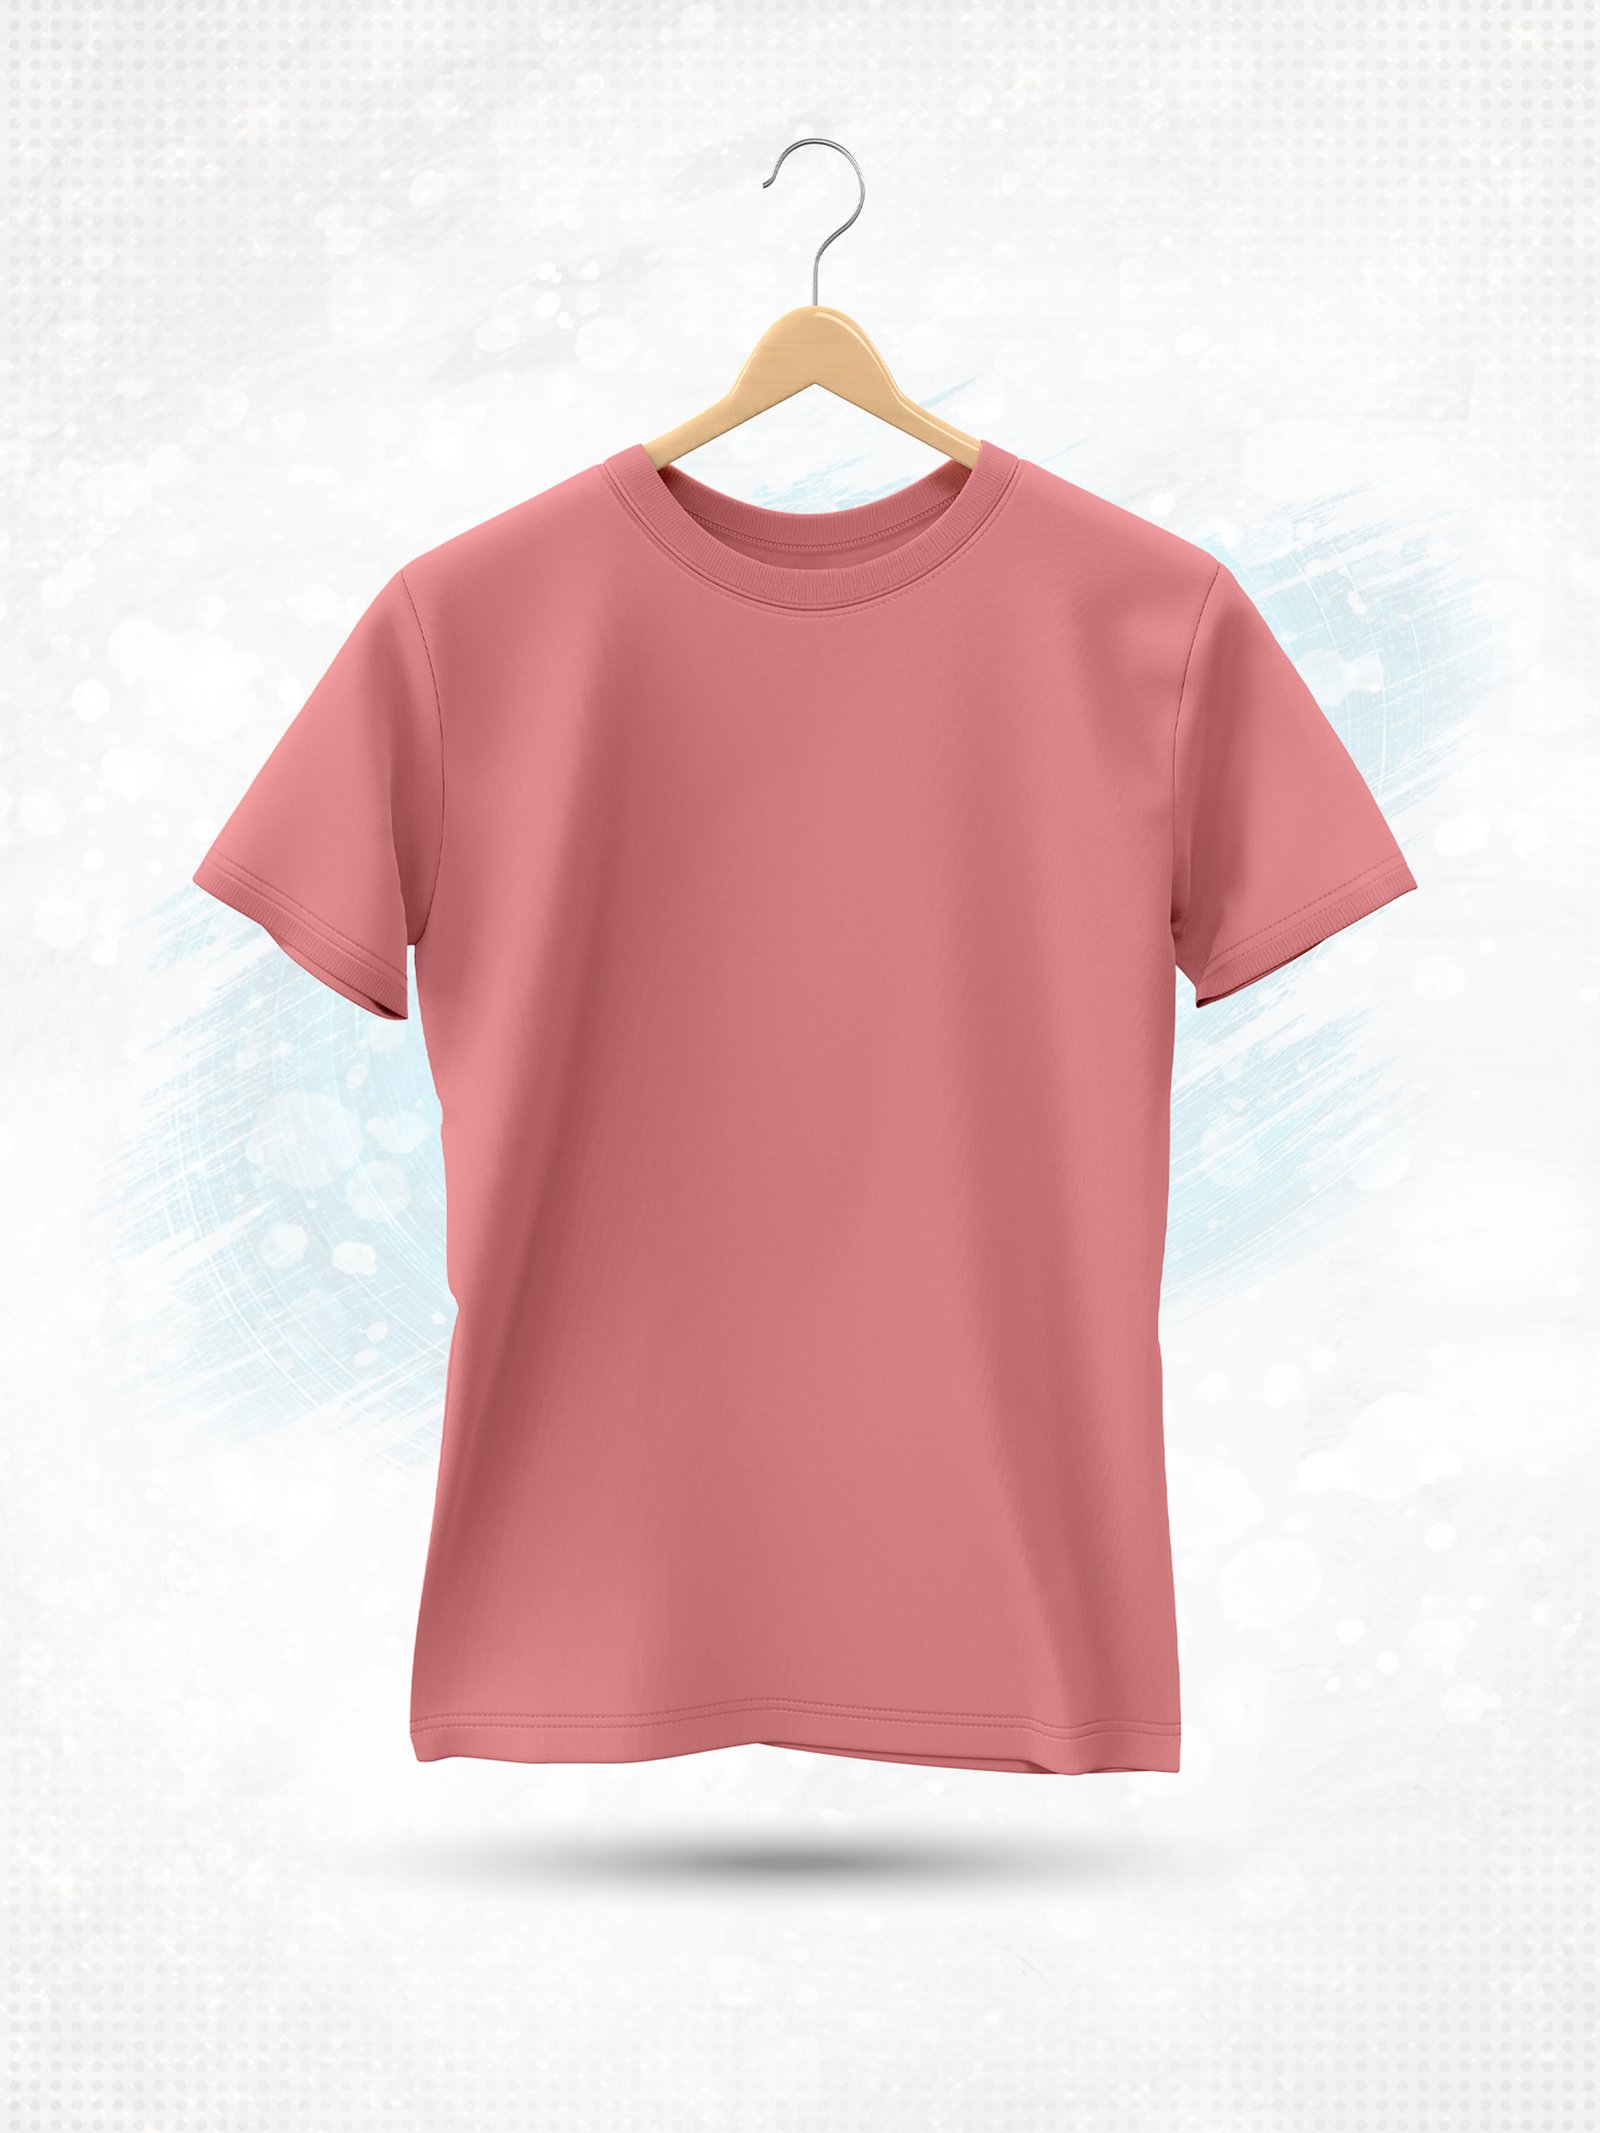 Peach color solid t shirt